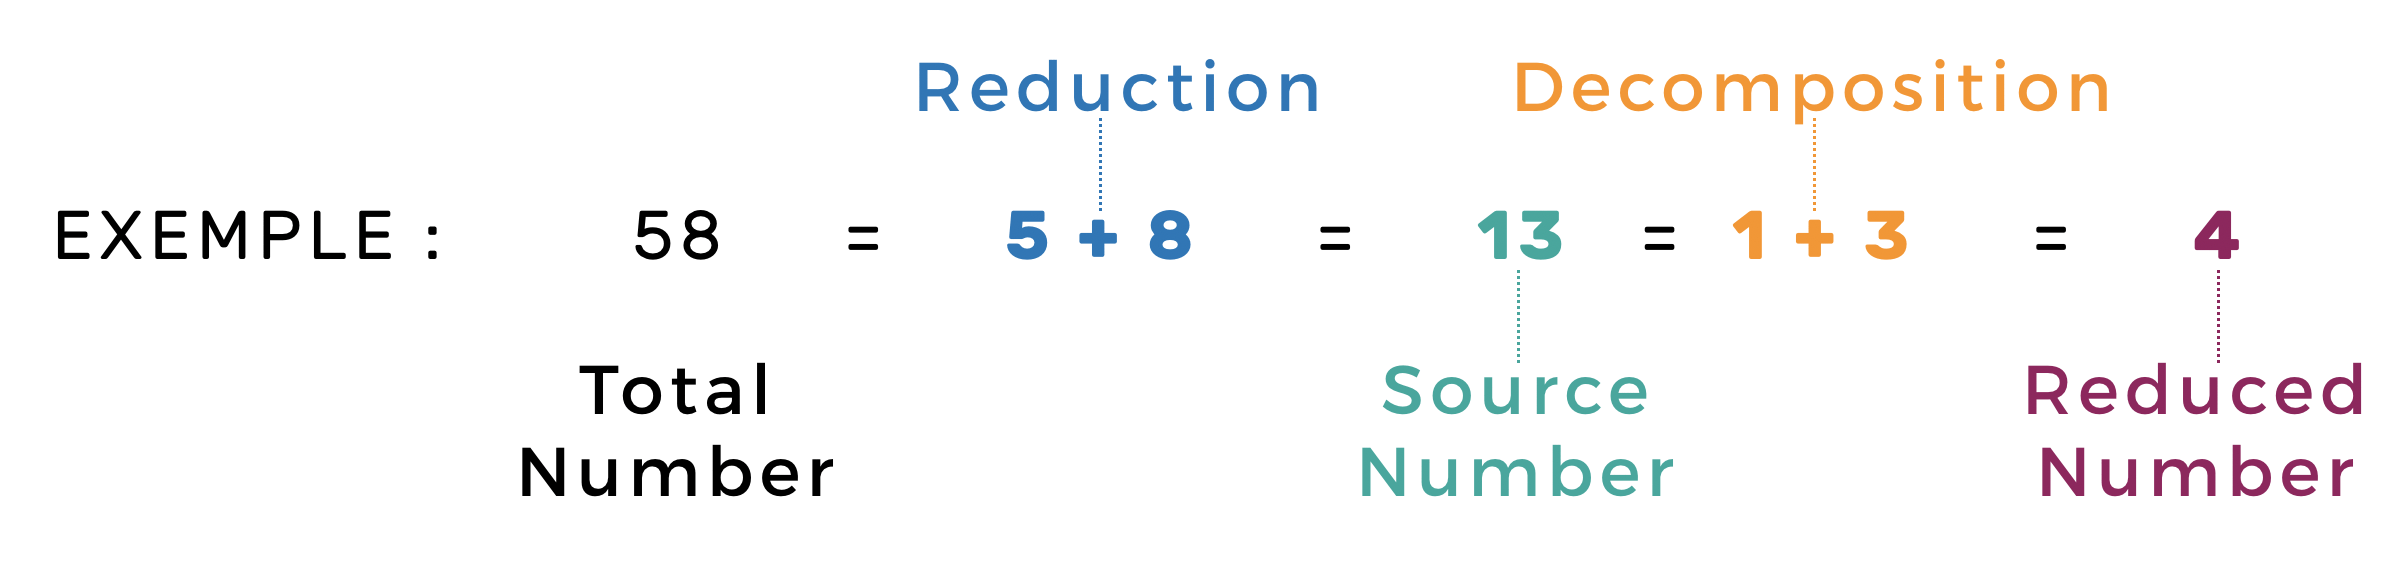 From source number to reduced number